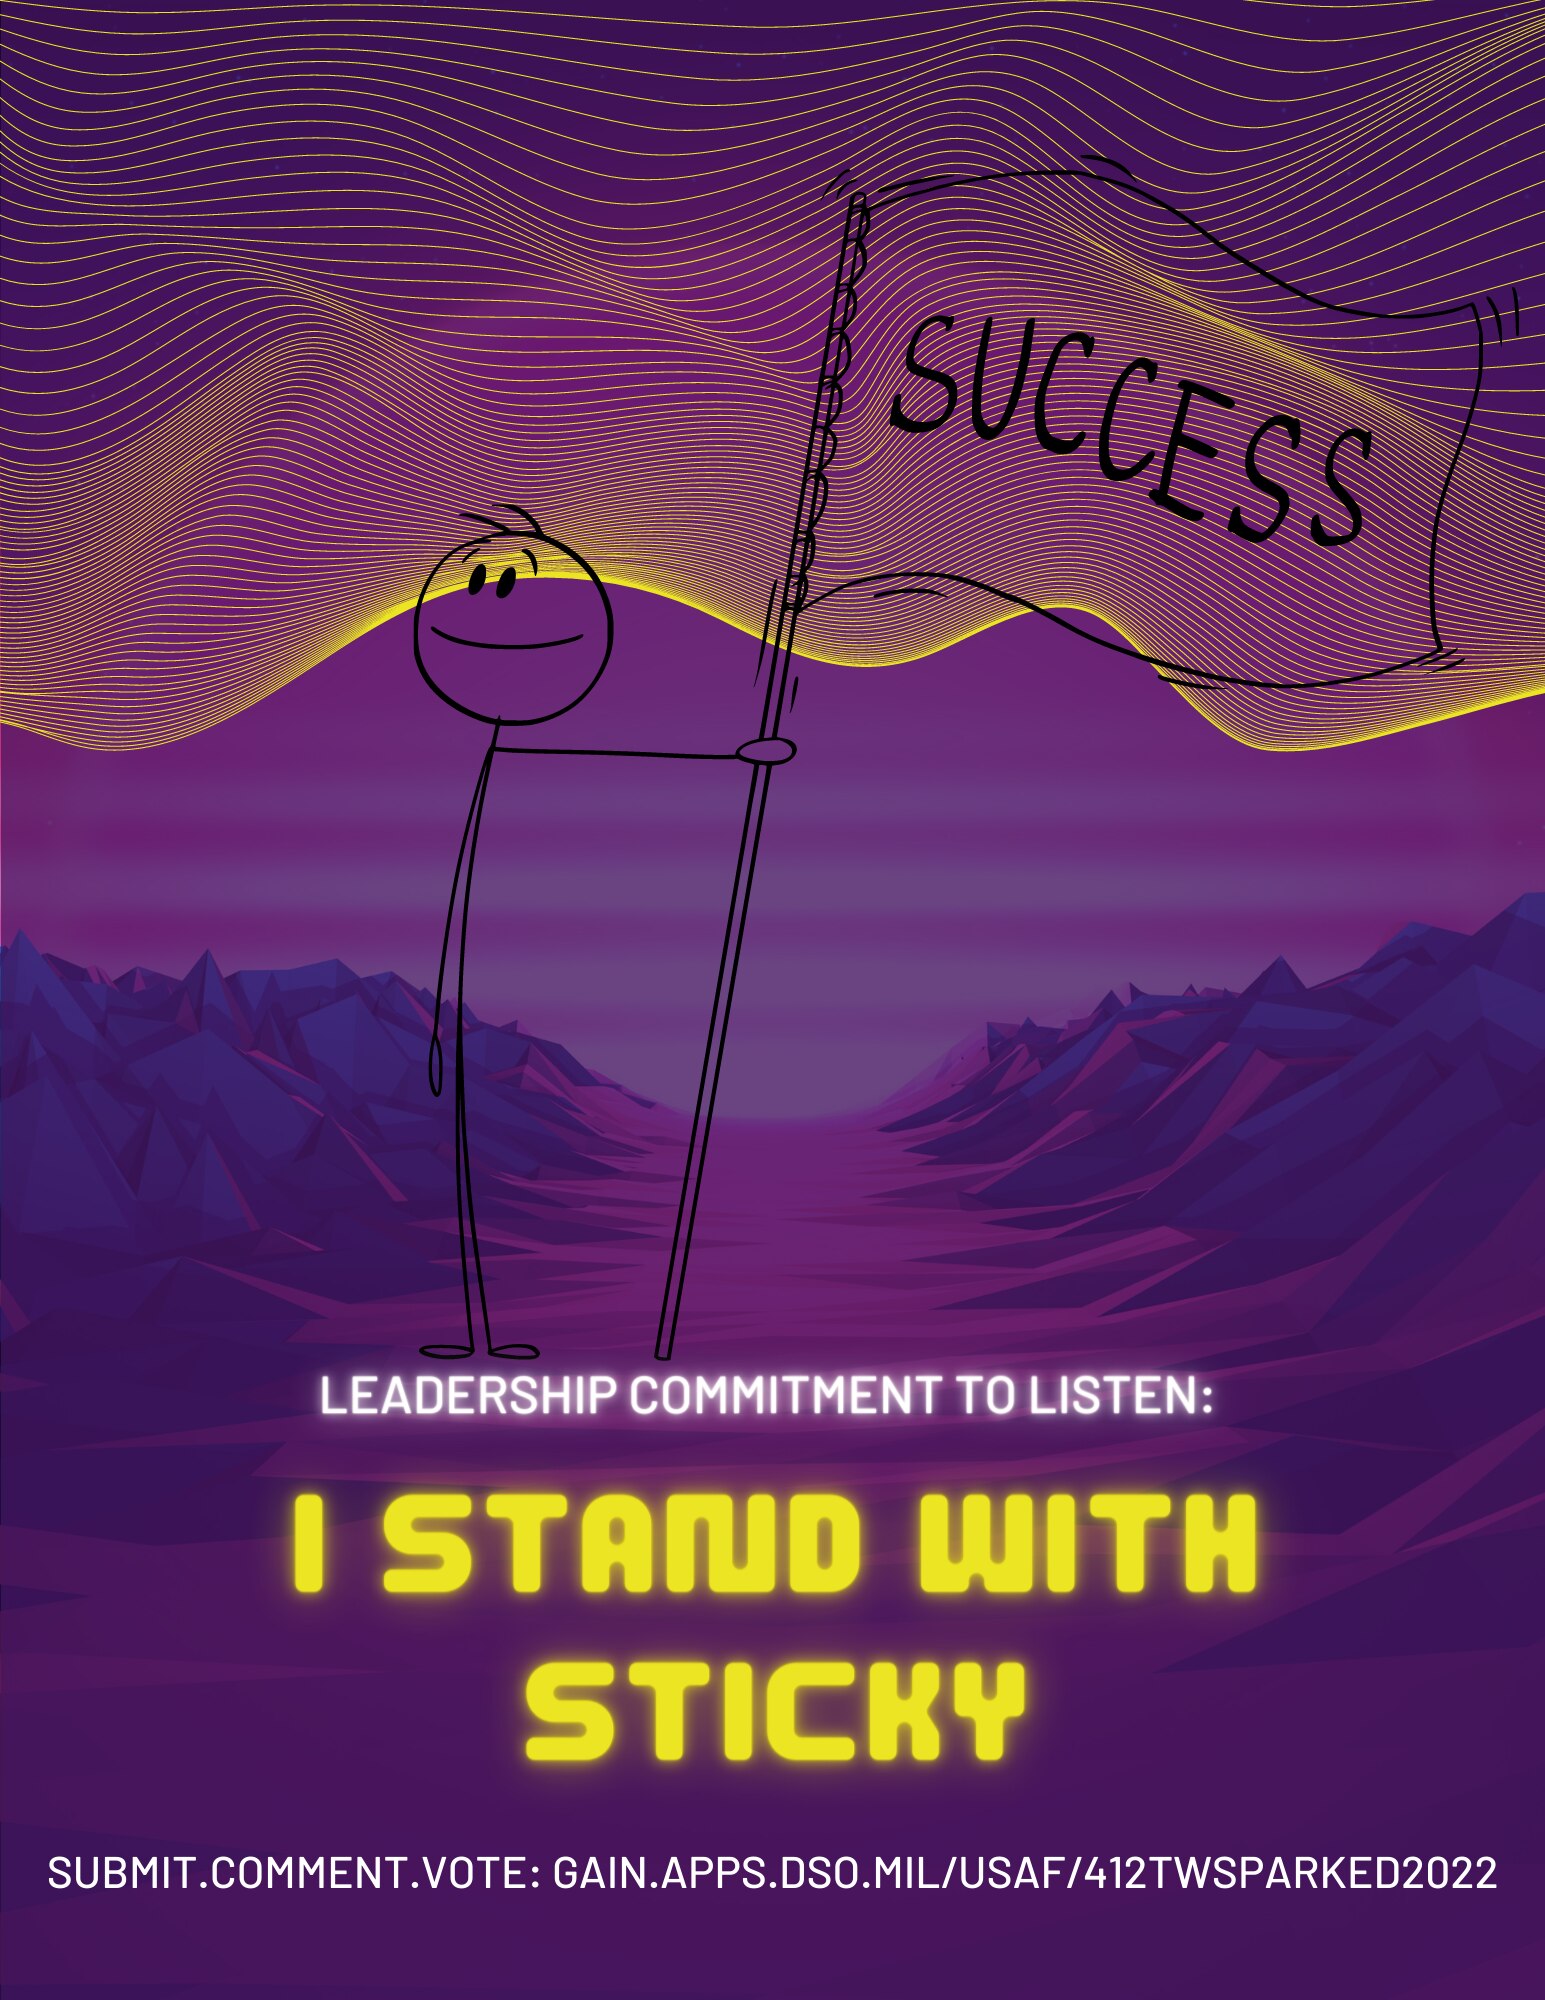 The 412th Test Wing Innovation Team, SparkED, announced their new mascot, Sticky McStickface, to help kick off their Innovation campaign.